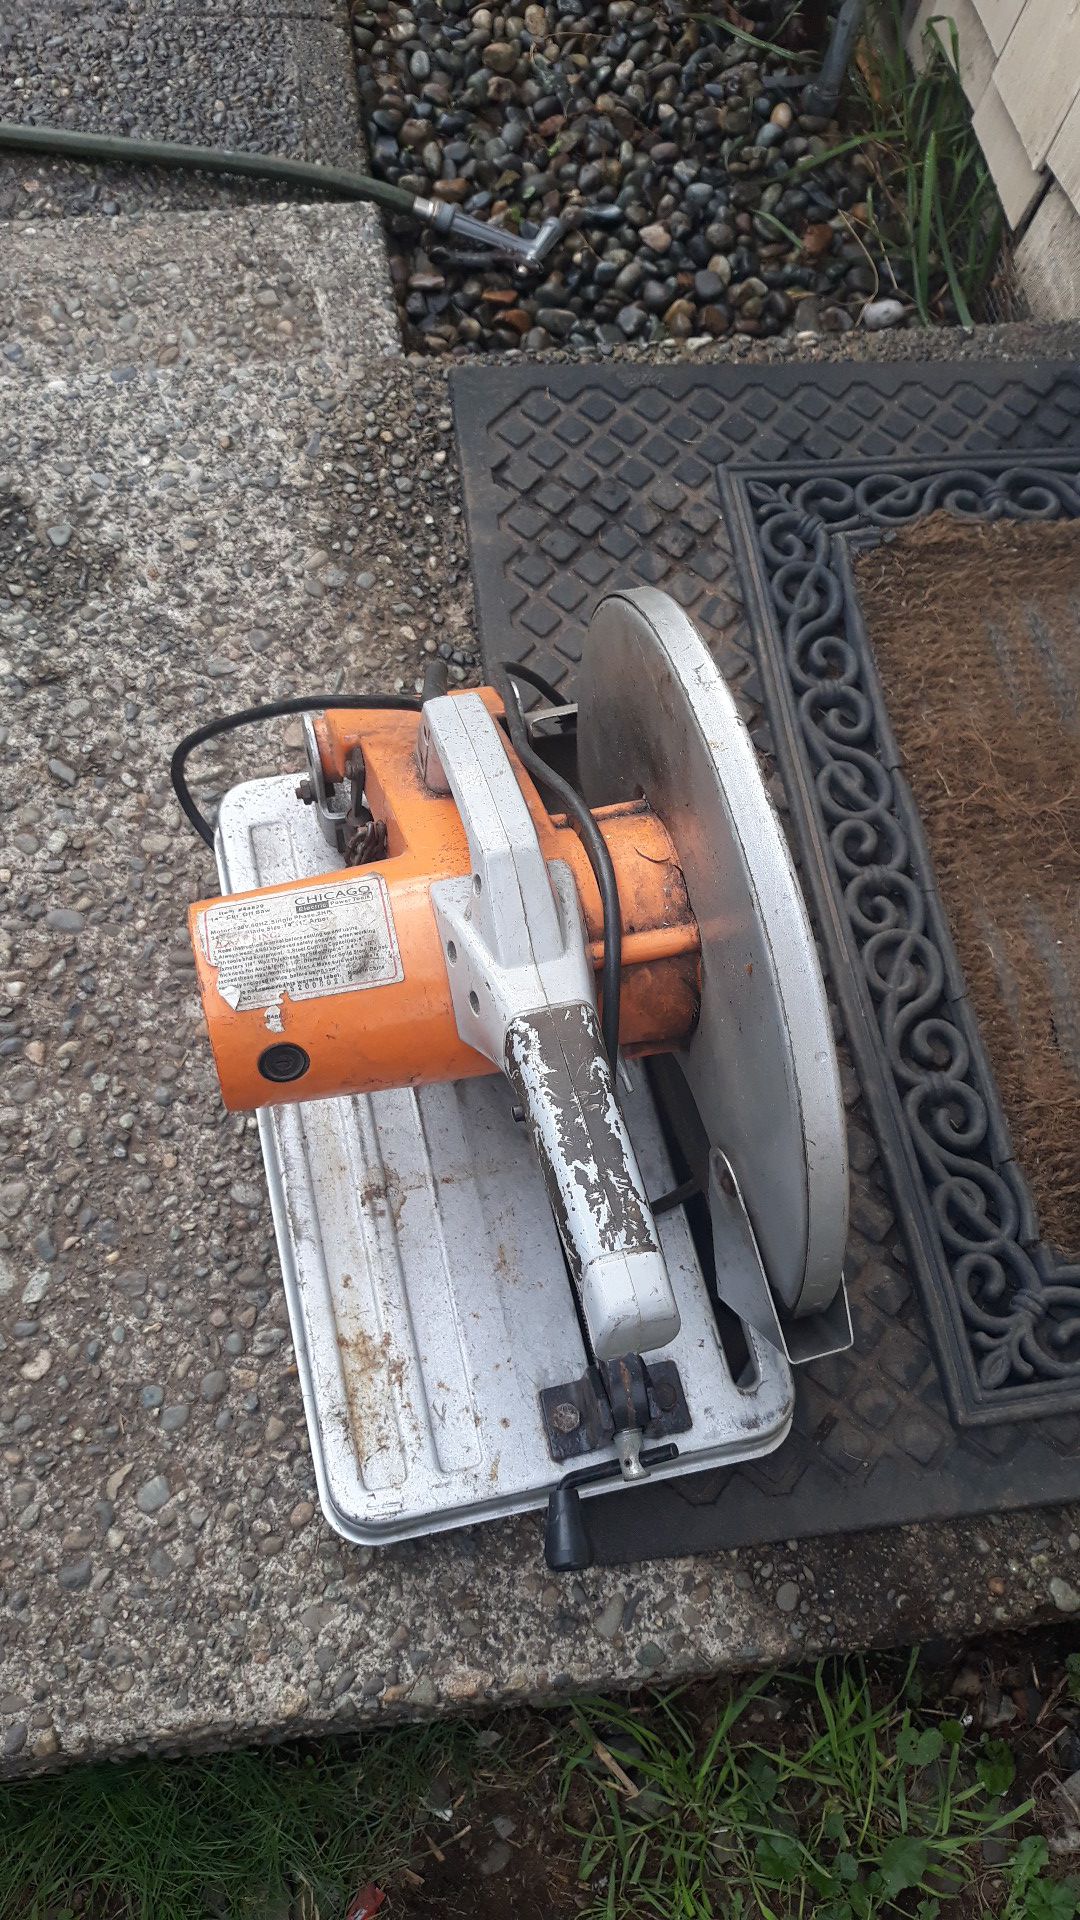 Chicago electric power tool